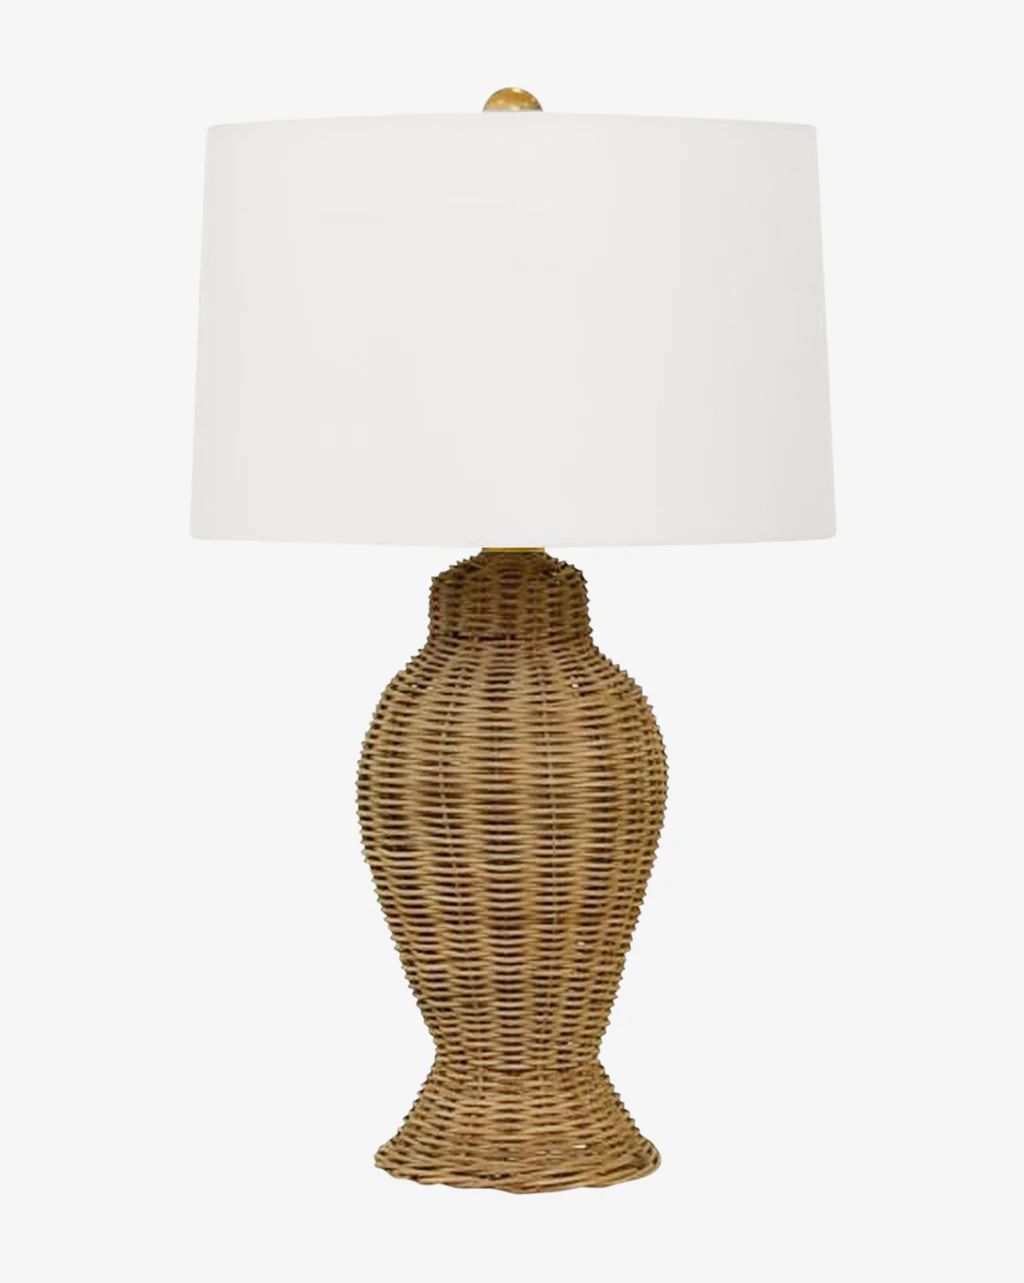 Manolo Table Lamp | McGee & Co.